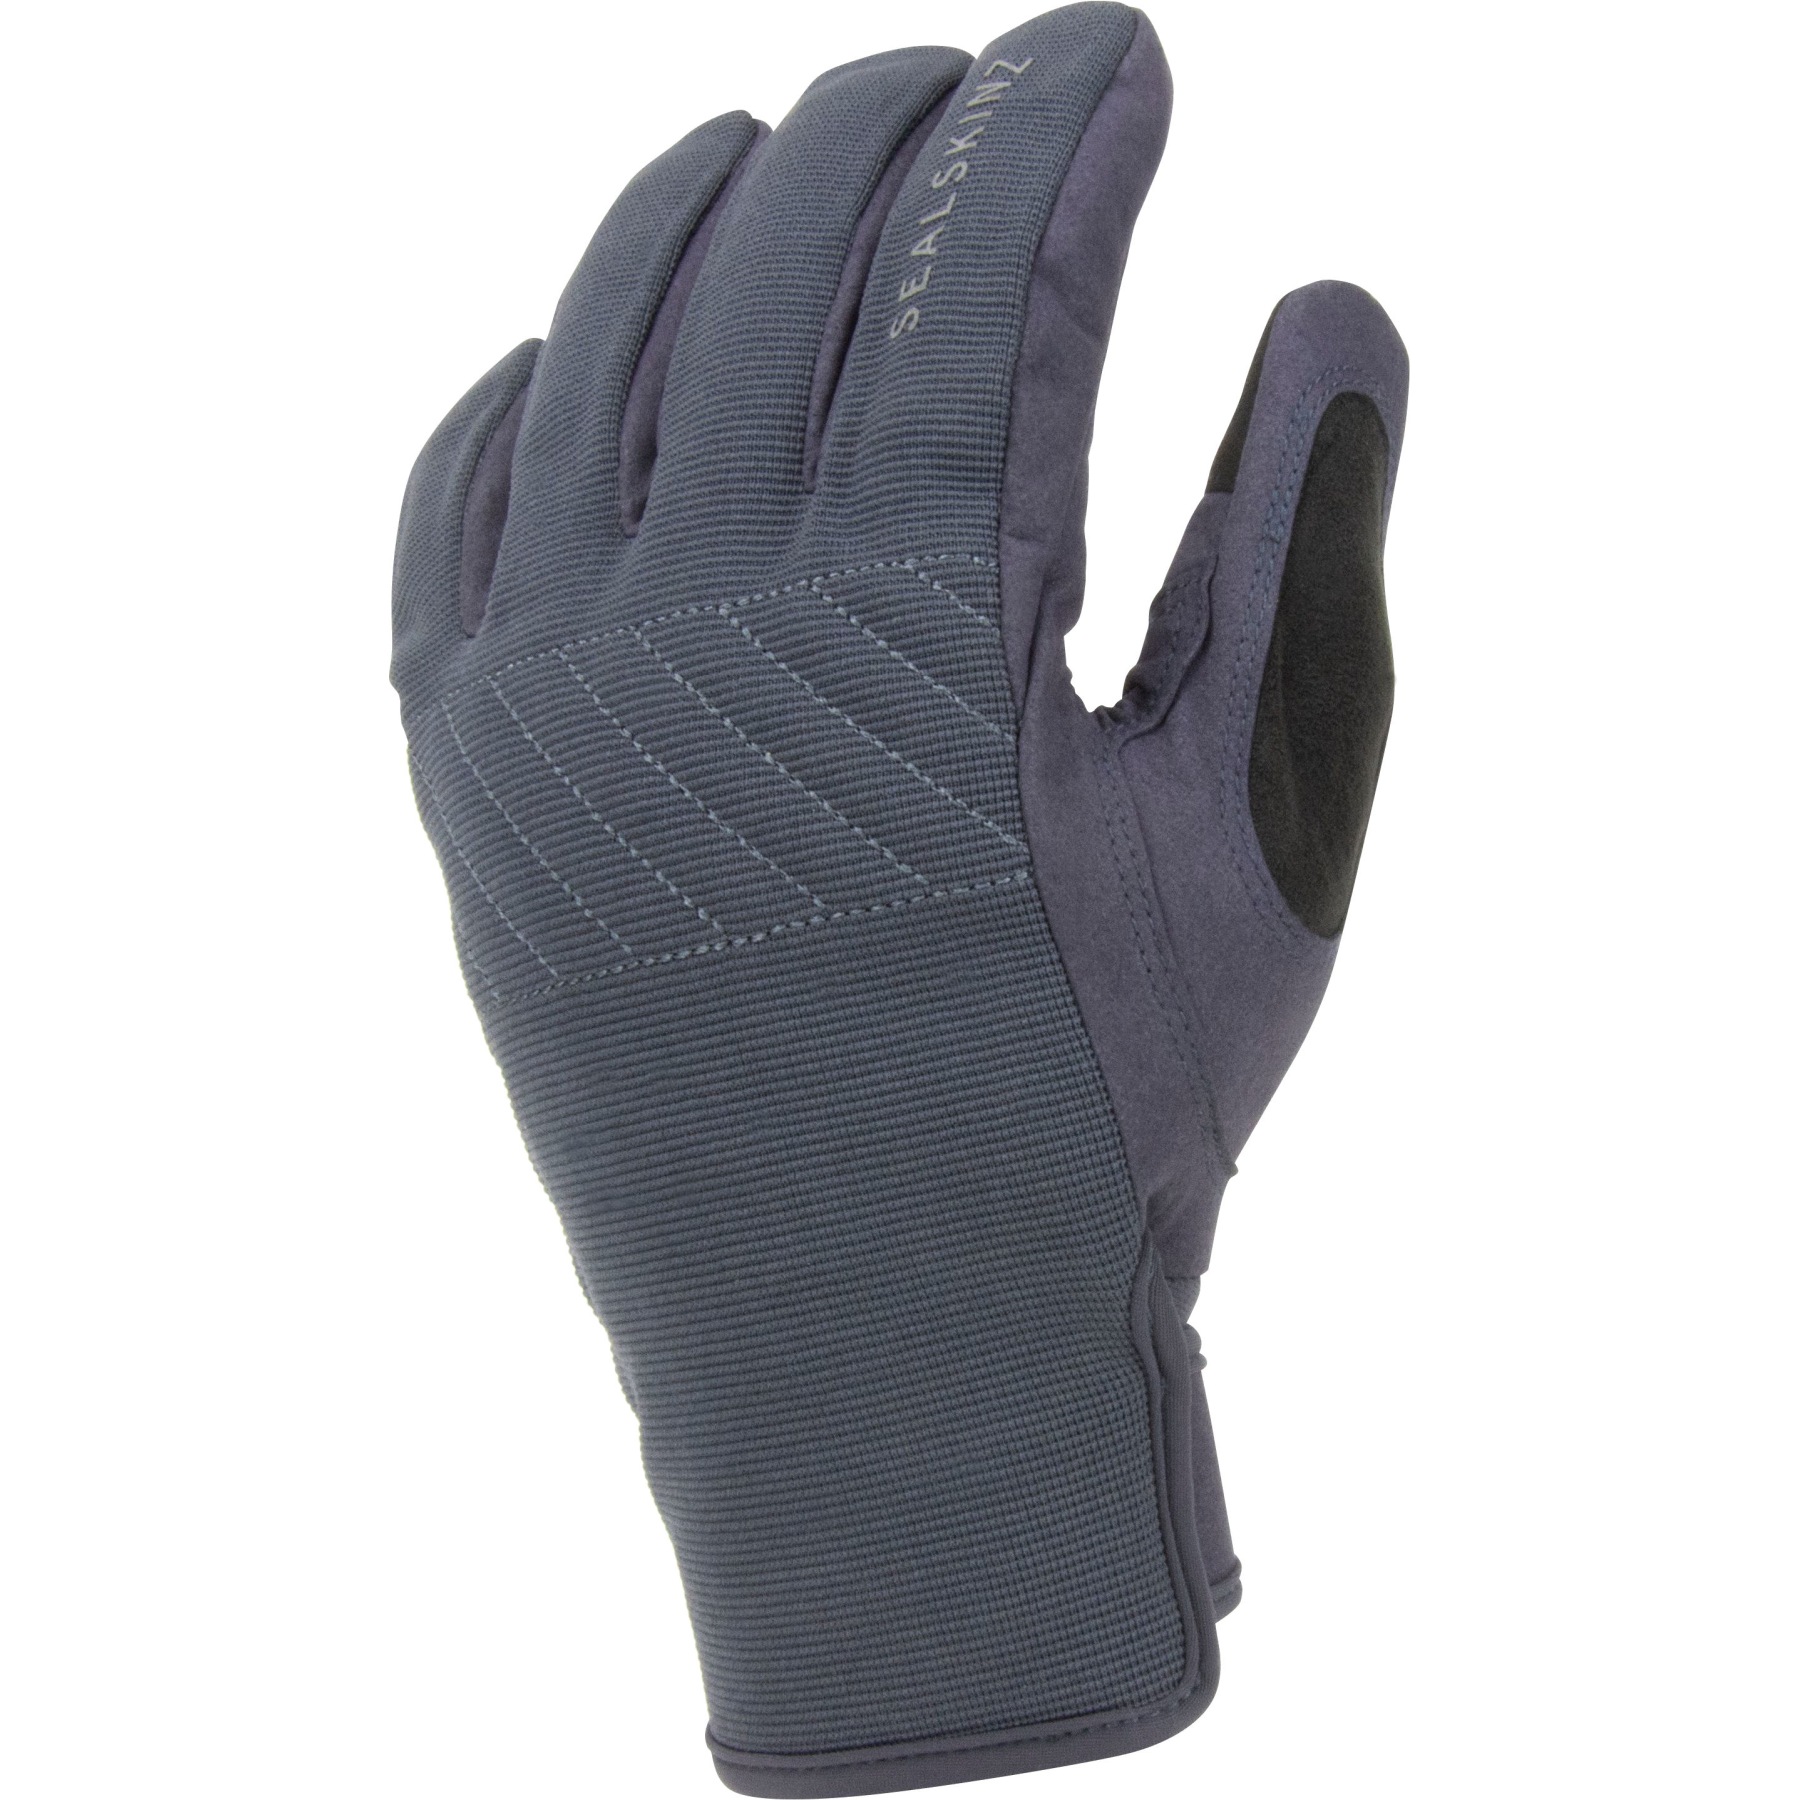 Picture of SealSkinz Waterproof All Weather Multi-Activity Gloves with Fusion Control™ - Grey/Black